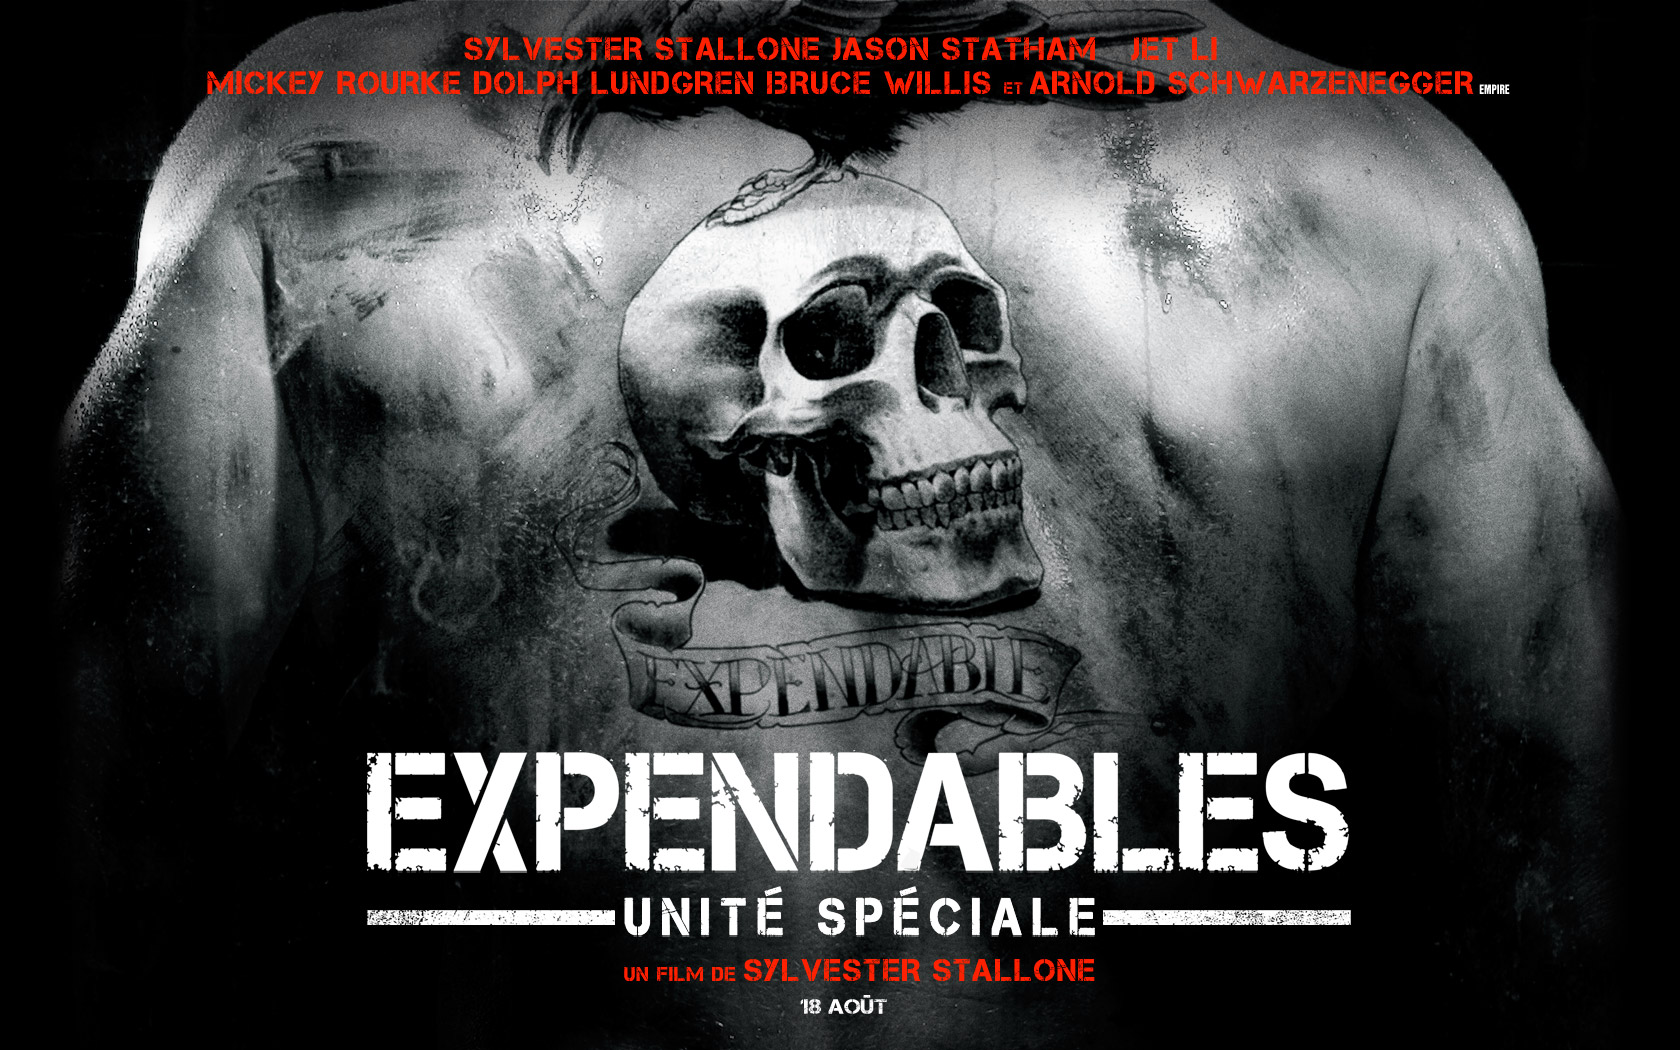 Expendables_04_1680x1050.jpg